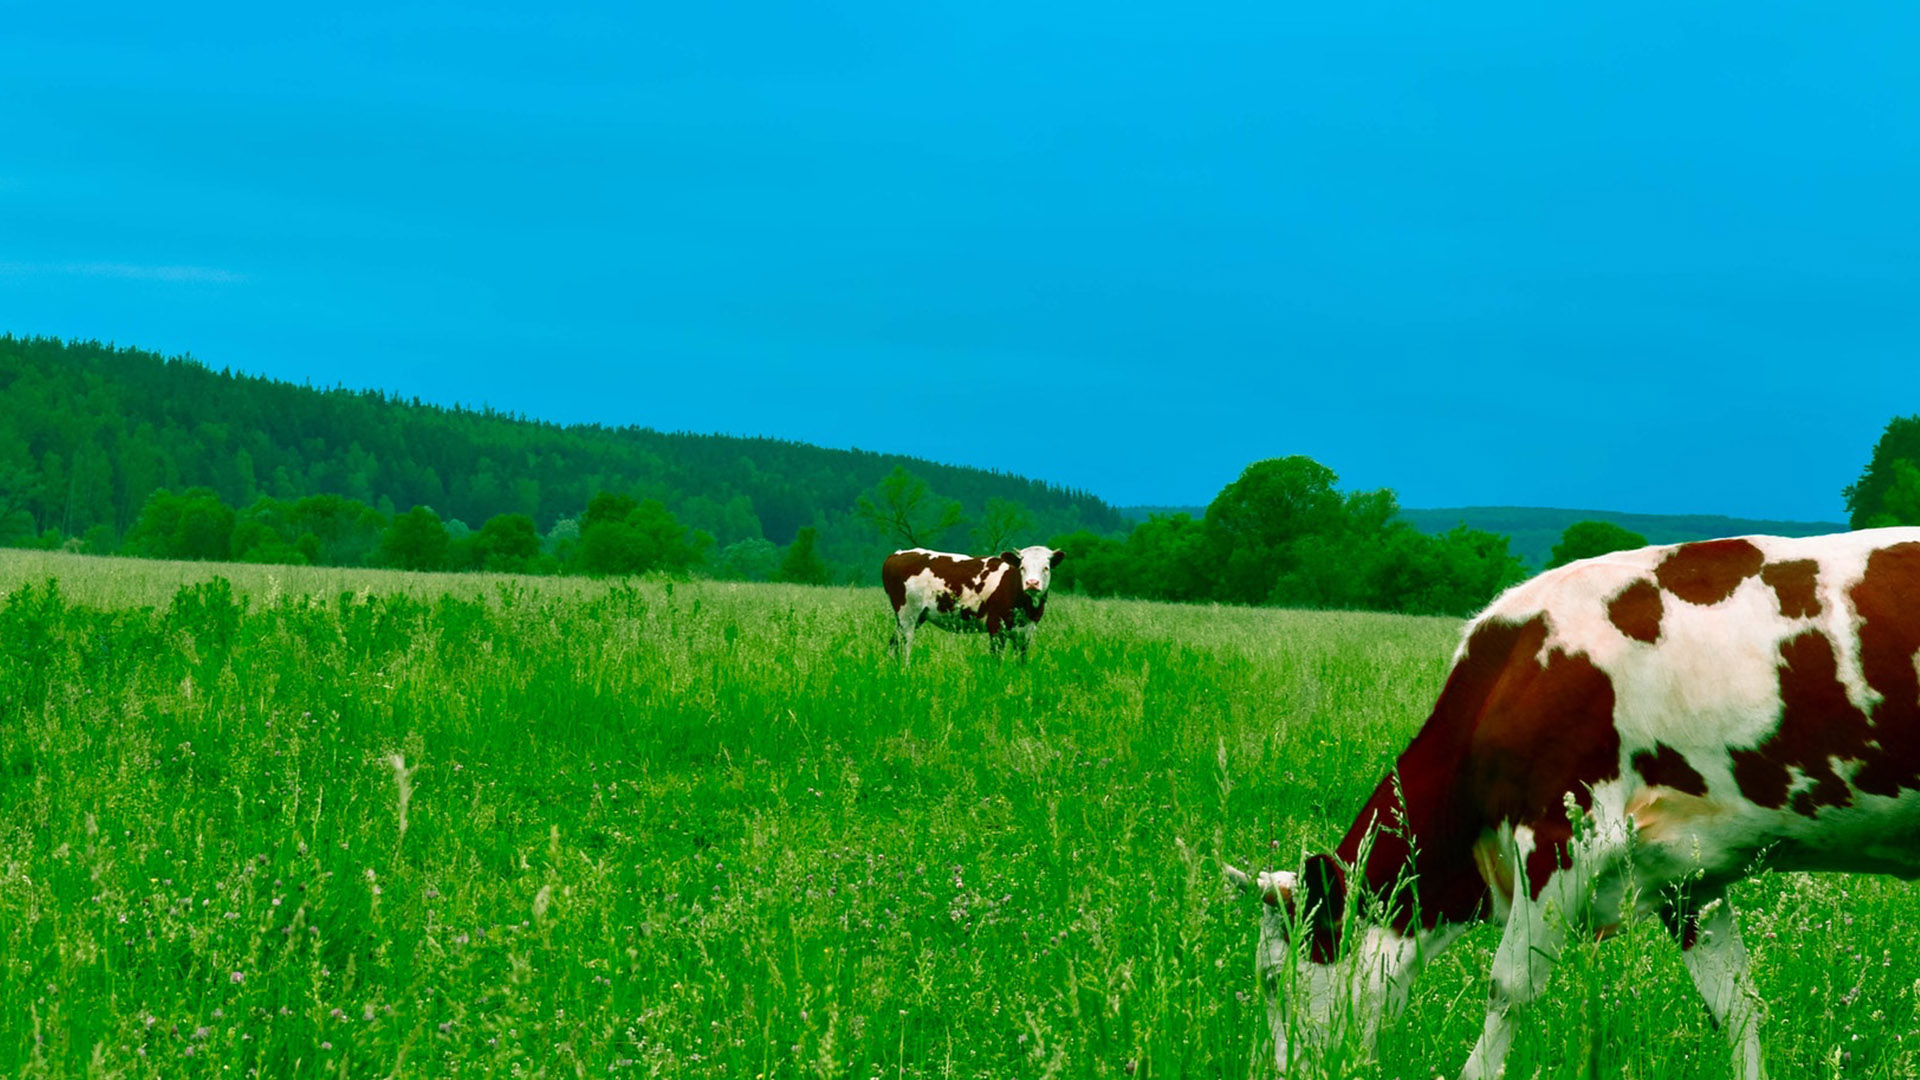 Cows grazing on tall grass in a vibrant green landscape